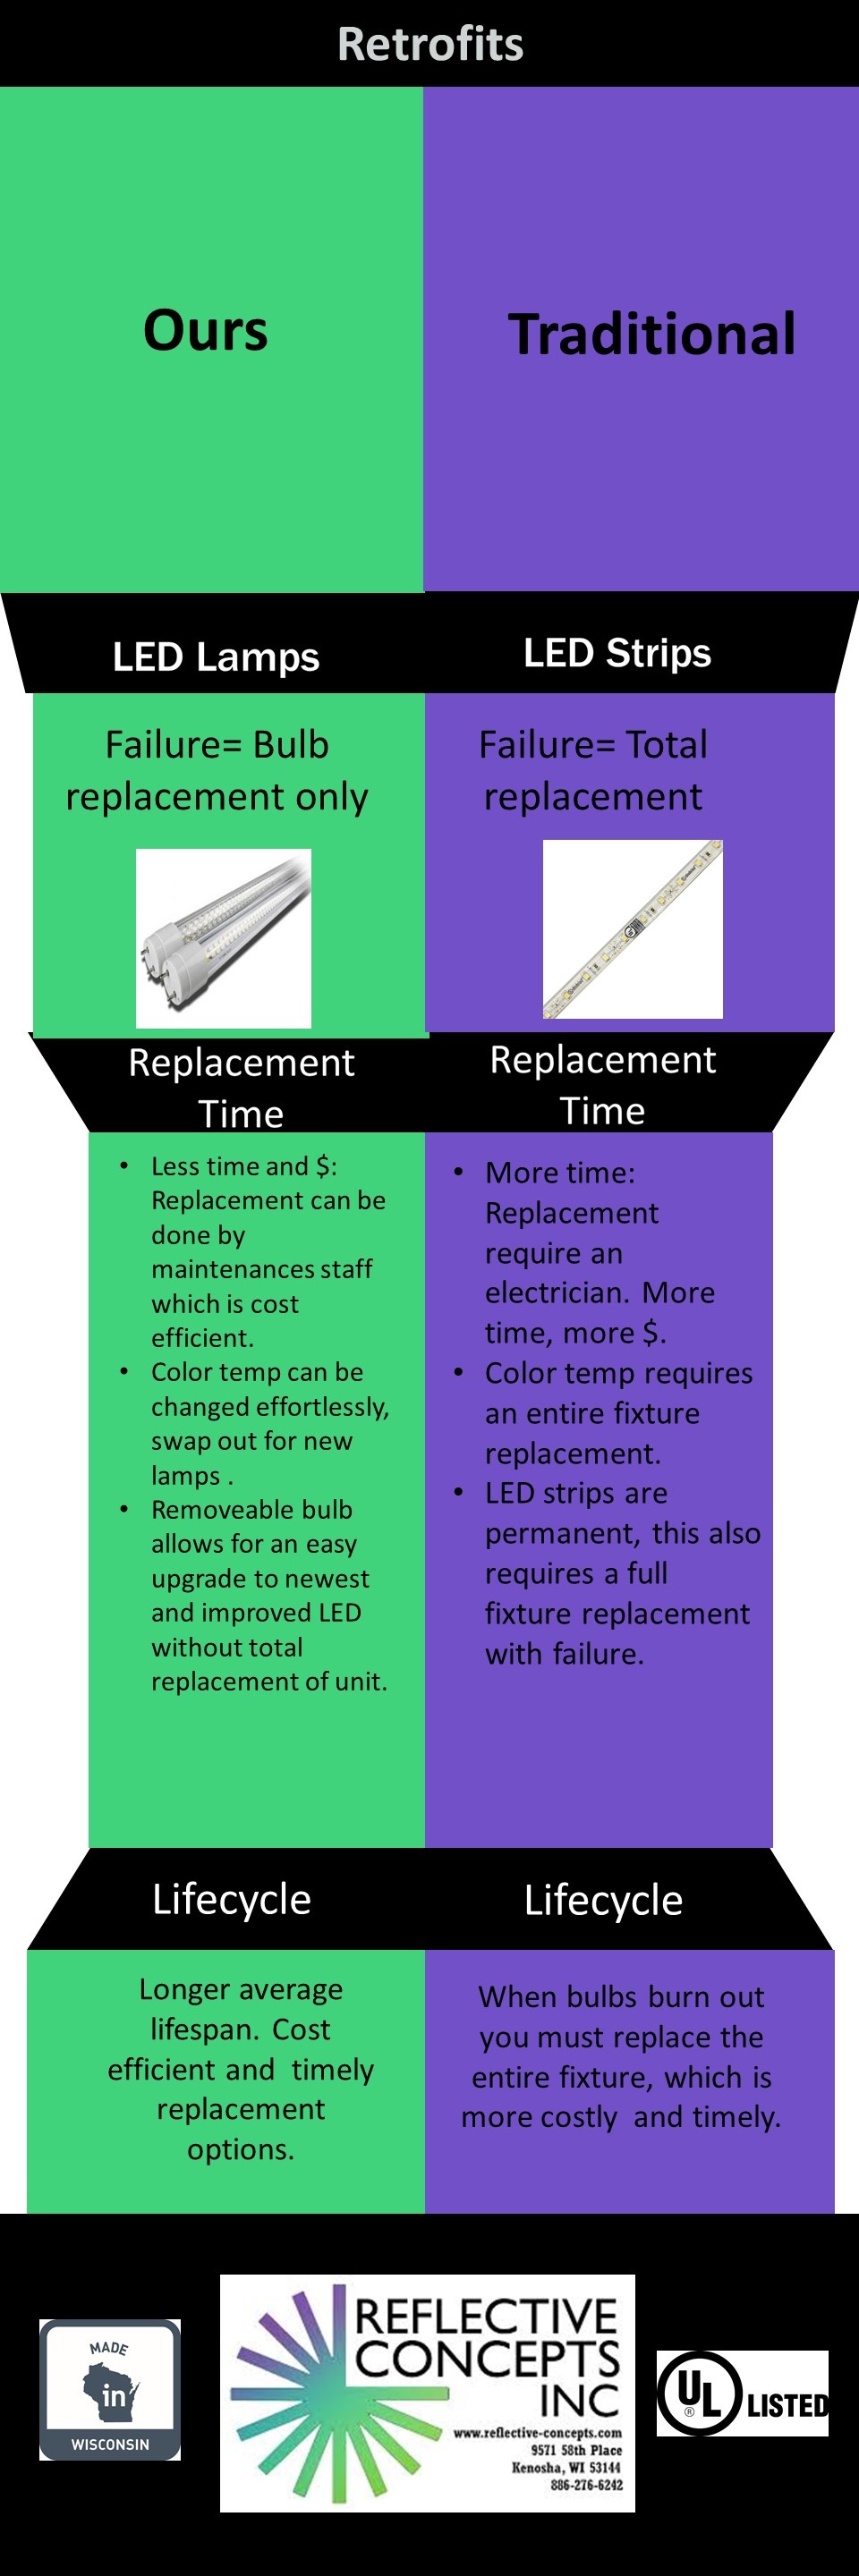 ours vs traditional retrofit infographic-1.jpg